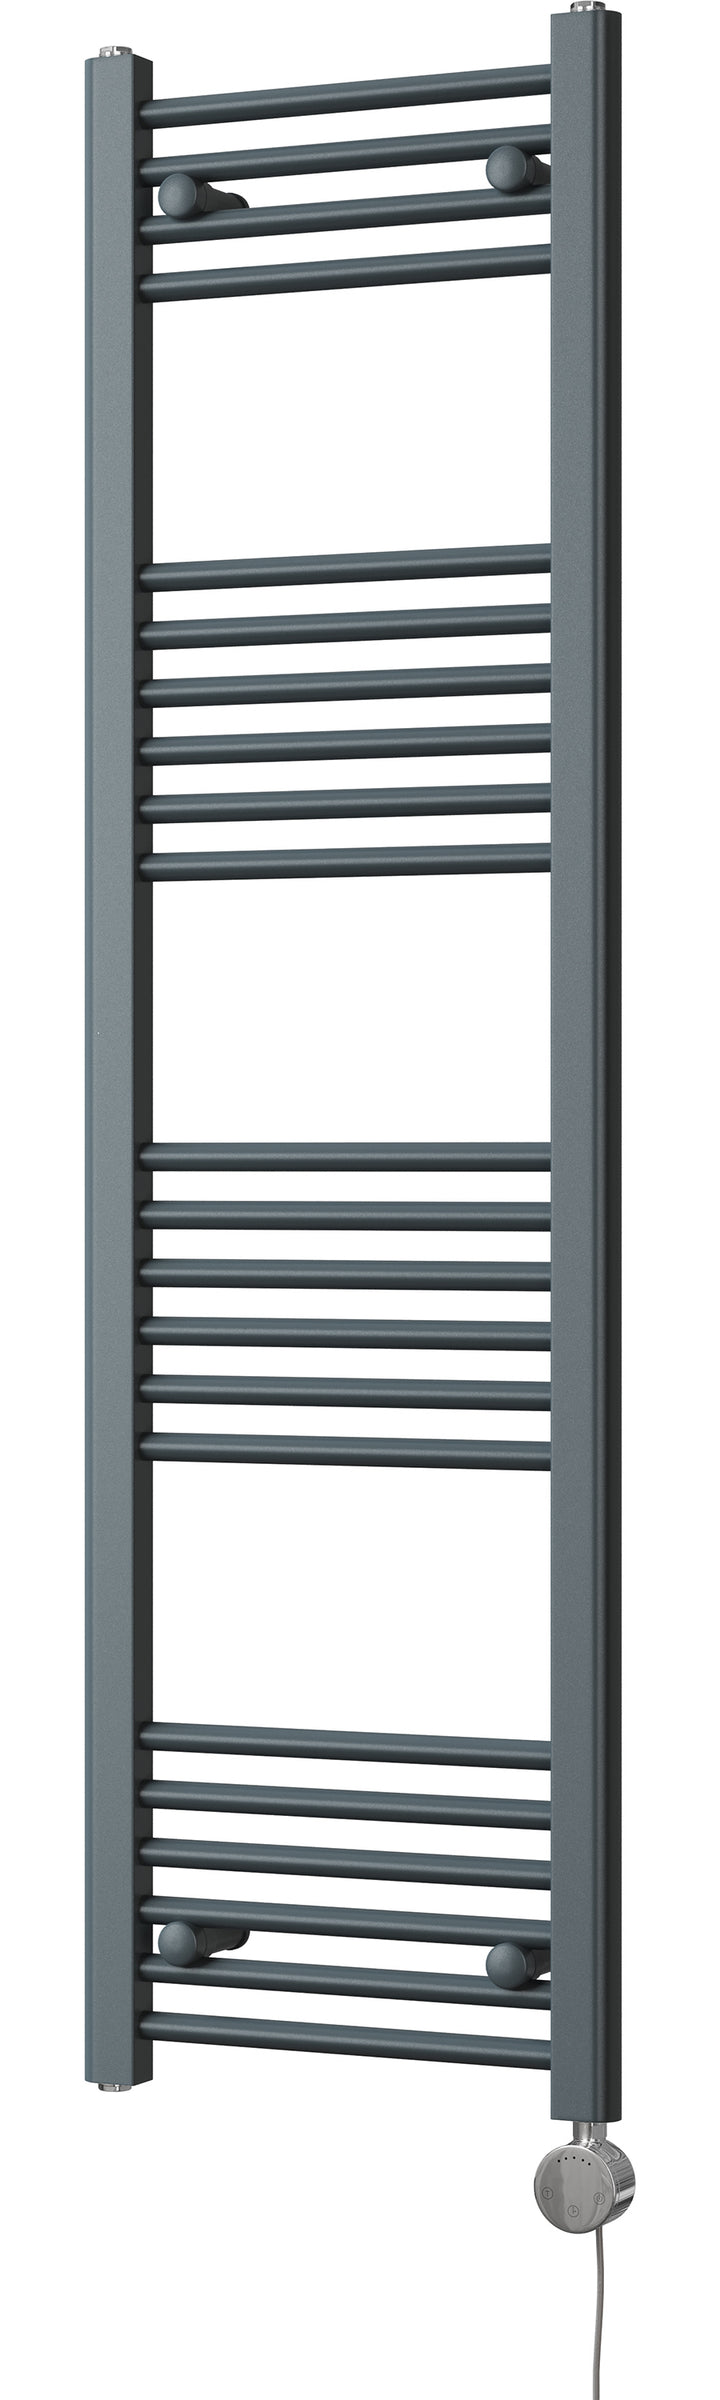 Zennor - Anthracite Electric Towel Rail H1400mm x W400mm Straight 300w Thermostatic